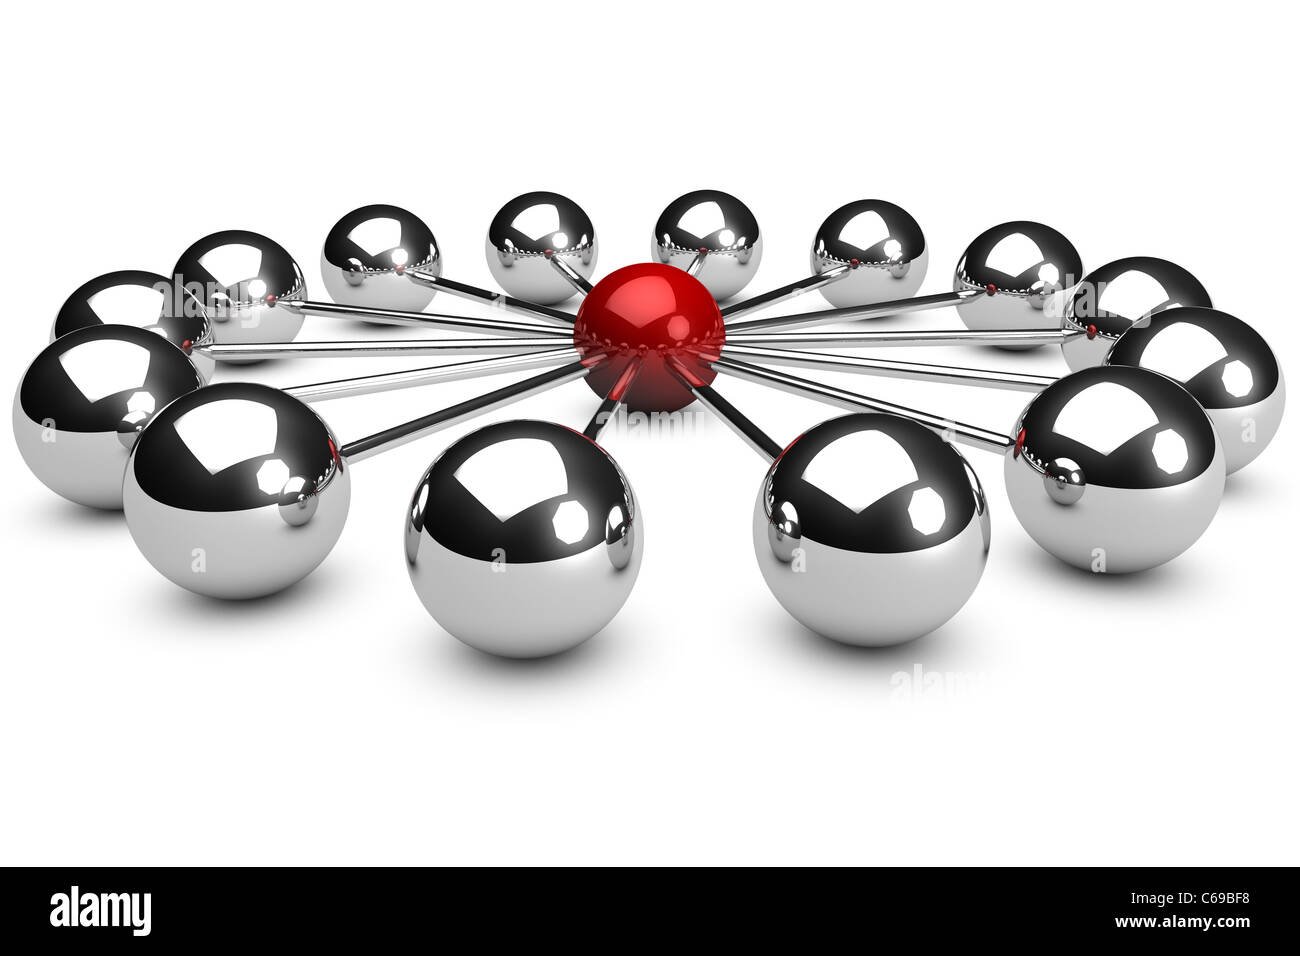 3d network concept on white background with a red sphere Stock Photo